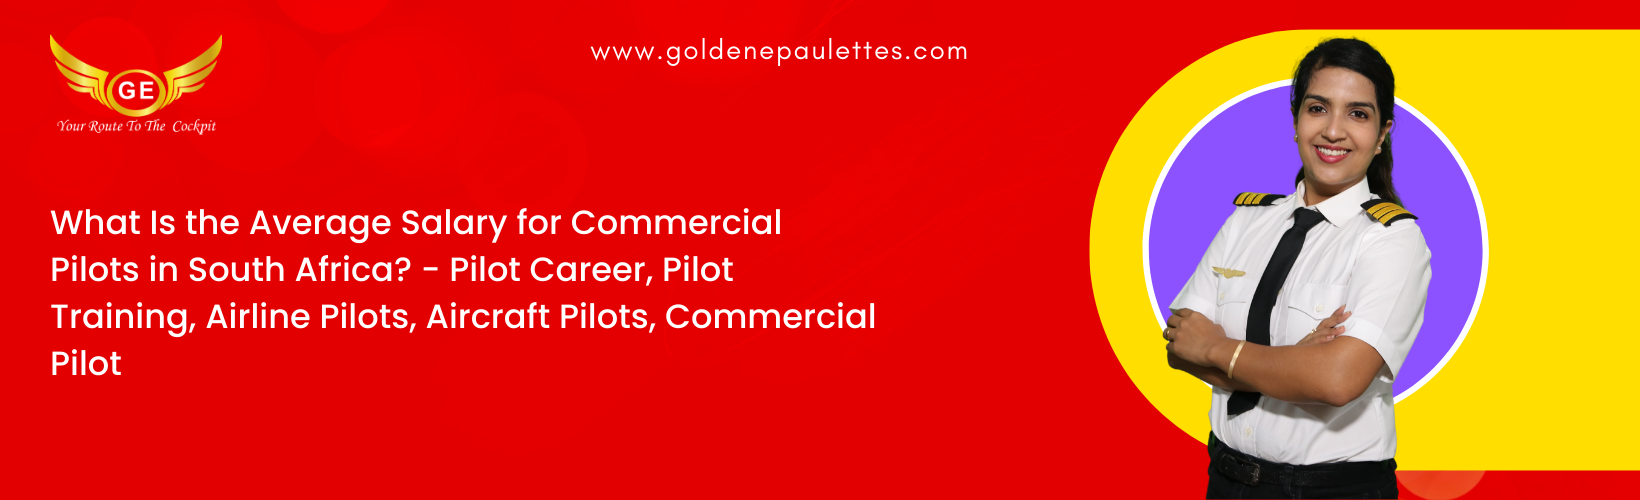 What Is the Average Salary for Commercial Pilots in South Africa